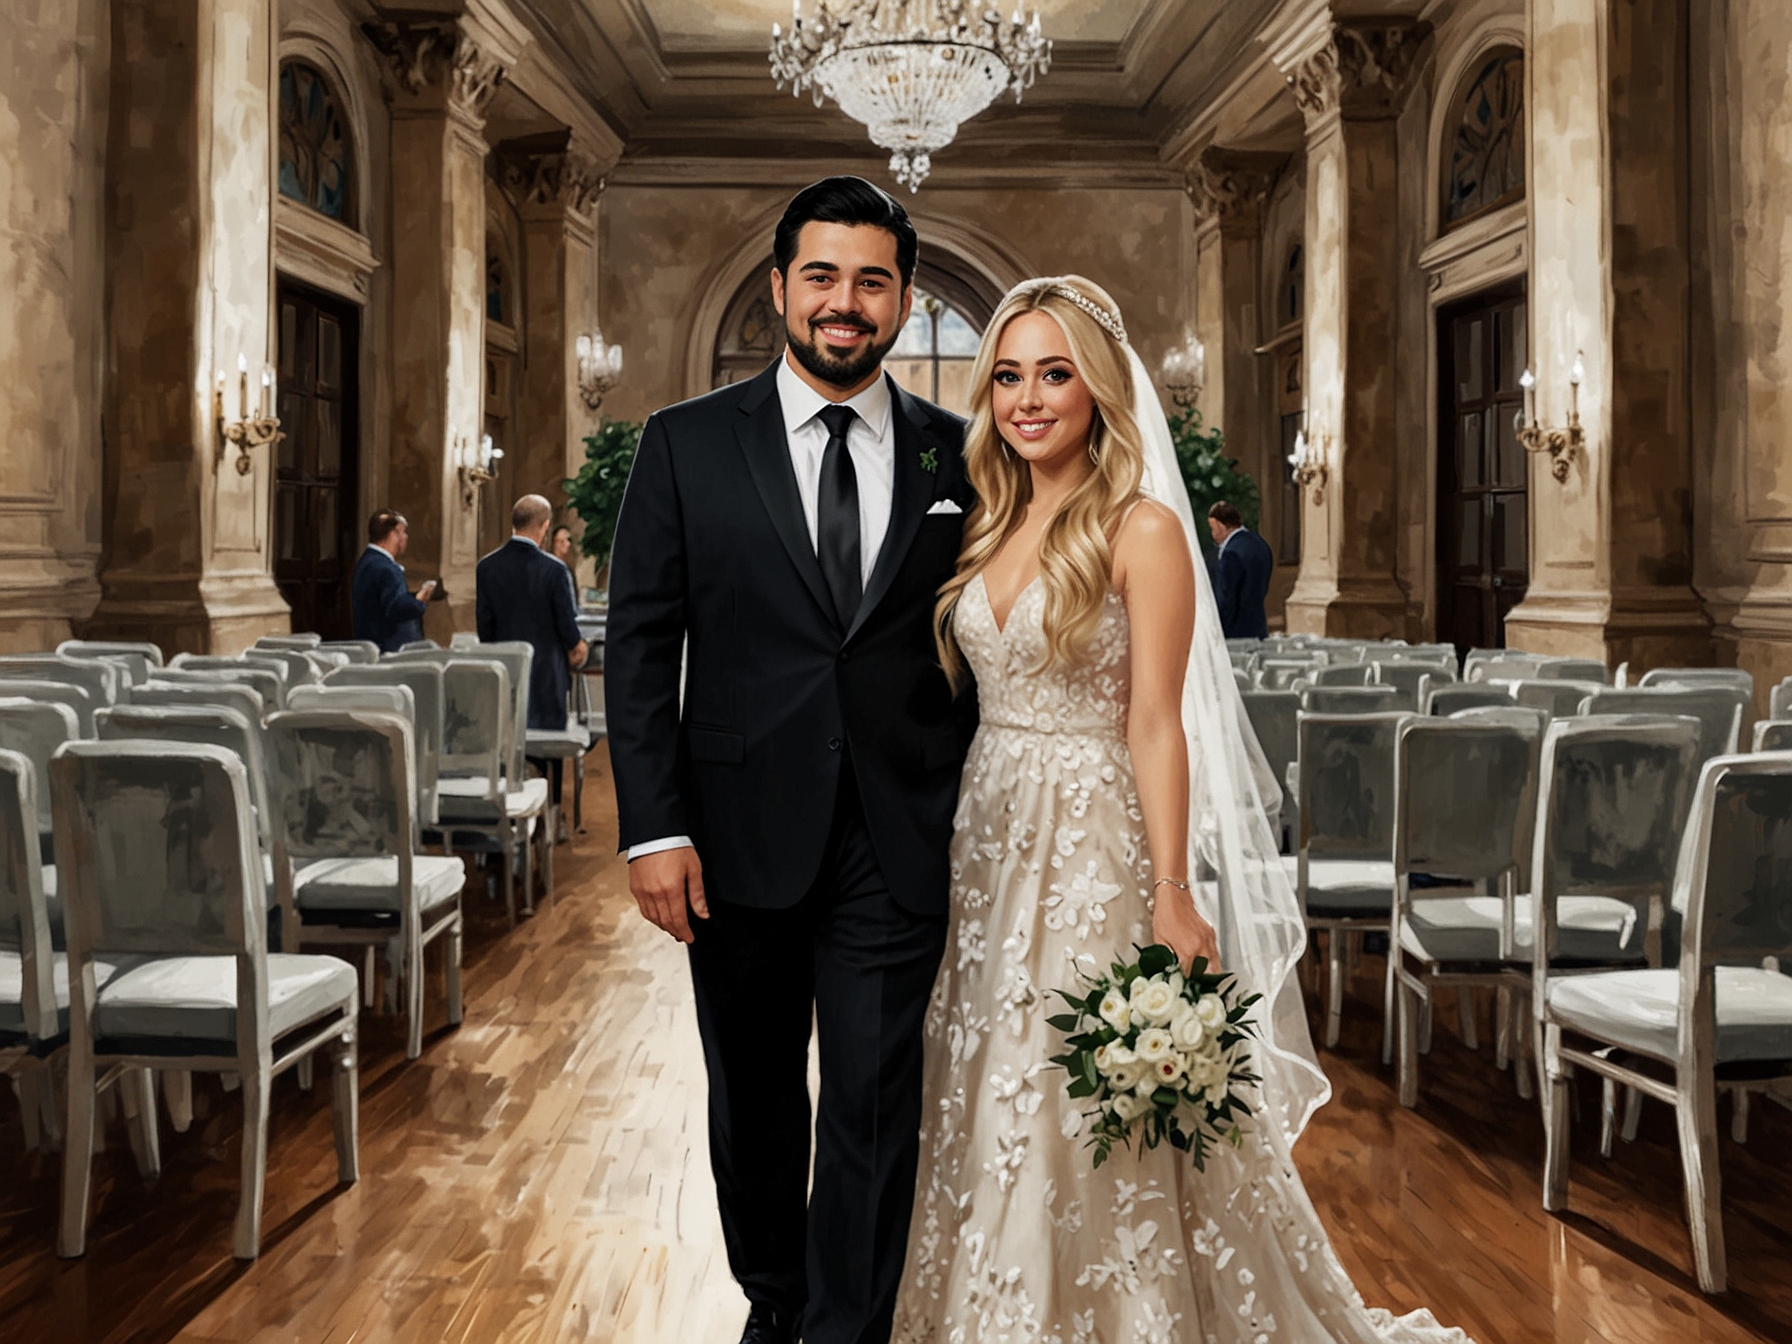 Tiffany Trump and Michael Boulos at their wedding, symbolizing the cultural bridge between the Trump family and the Arab American community, now leveraged for political outreach.